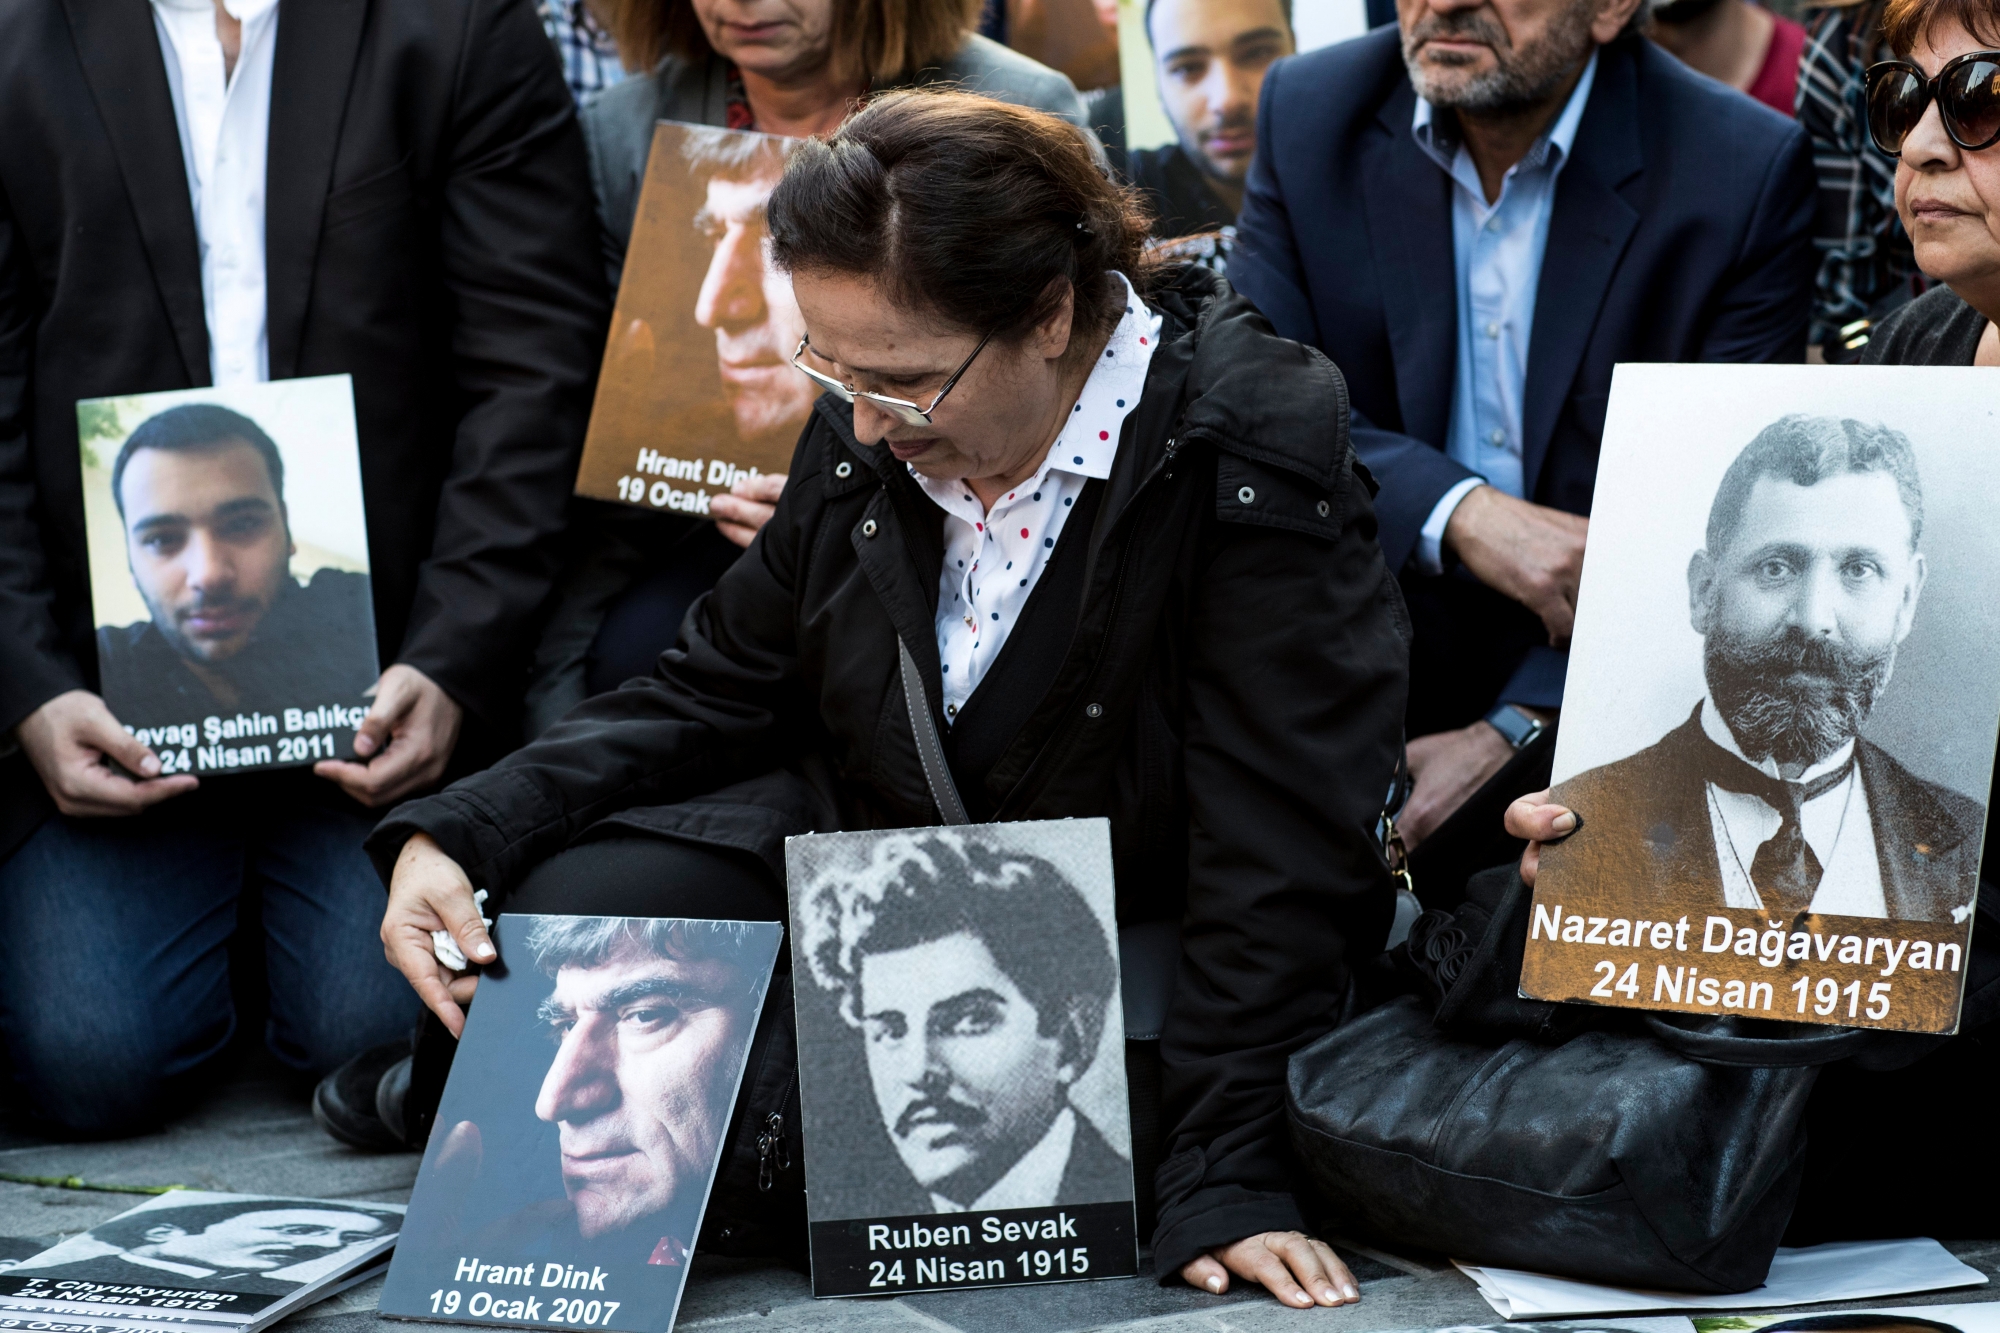 epa06689764 Rakel Dink (C) the wife of slain Armenian Journaist Hrant Dink holds pictures of victims as she attends a memorial to mark the 103rd anniversary of the mass killings of Armenians in the Ottoman Empire, in Istanbul, Turkey, 24 April 2018. The anniversary is marked on 24 April 2018, to mark the beginning of events that led to the systematic extermination of 1.5 million Armenians during World War I. Most scholars recognize the mass killings as genocide, but the Turkish government resists the label and insists the number of deaths is smaller.  EPA/SEDAT SUNA TURKEY ARMENIA DEMONSTRATION